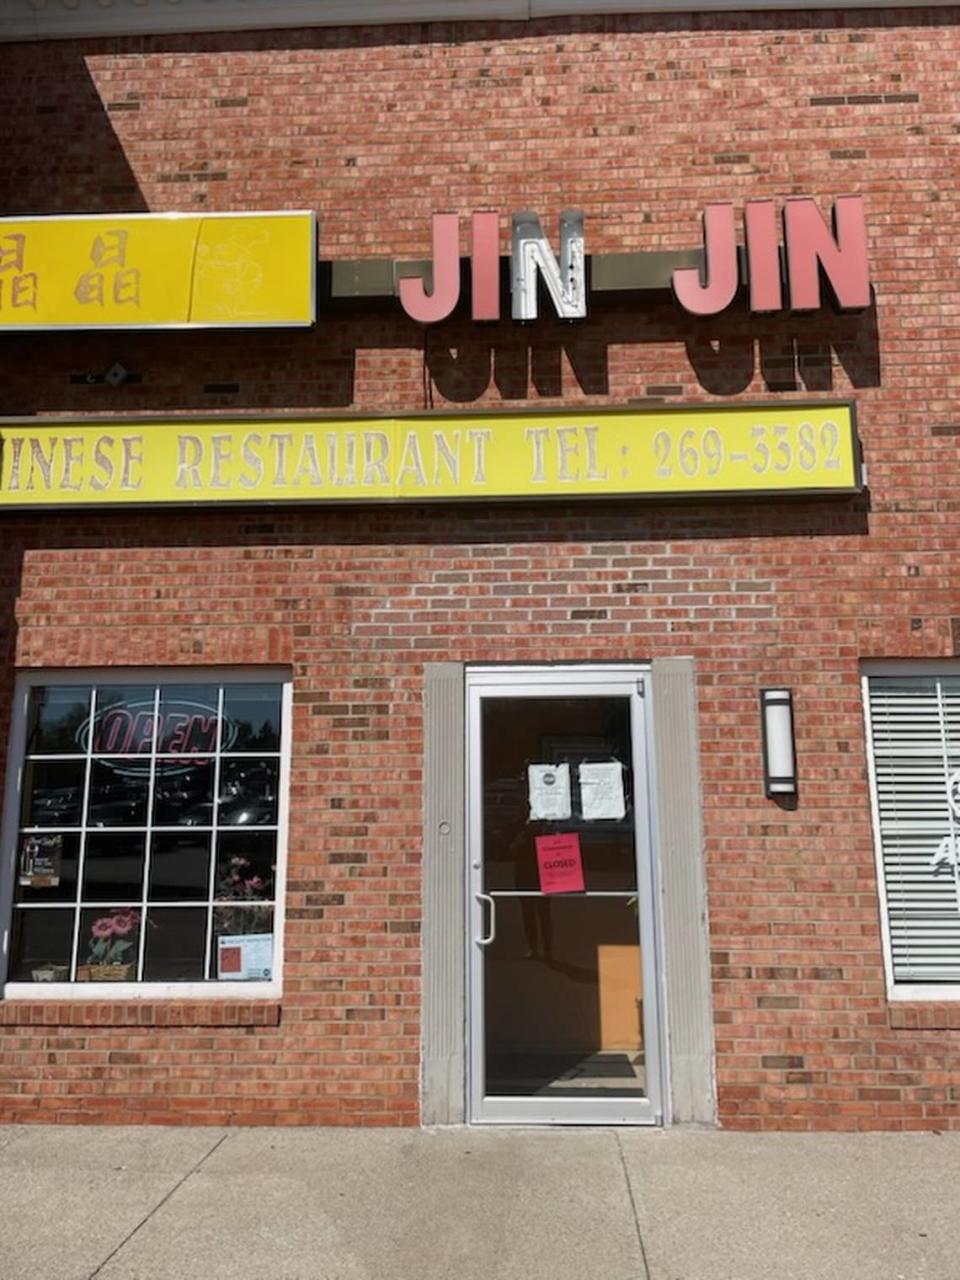 Jin Jin Chinese Restaurant at 1060 Chinoe Rd. has a notice on the door indicating that it was ordered closed by the Lexington Fayette County Health Department on April 7. It is unclear if the restaurant, which is in the same shopping center as Kroger, is permanently closed or if it will reopen later this month.